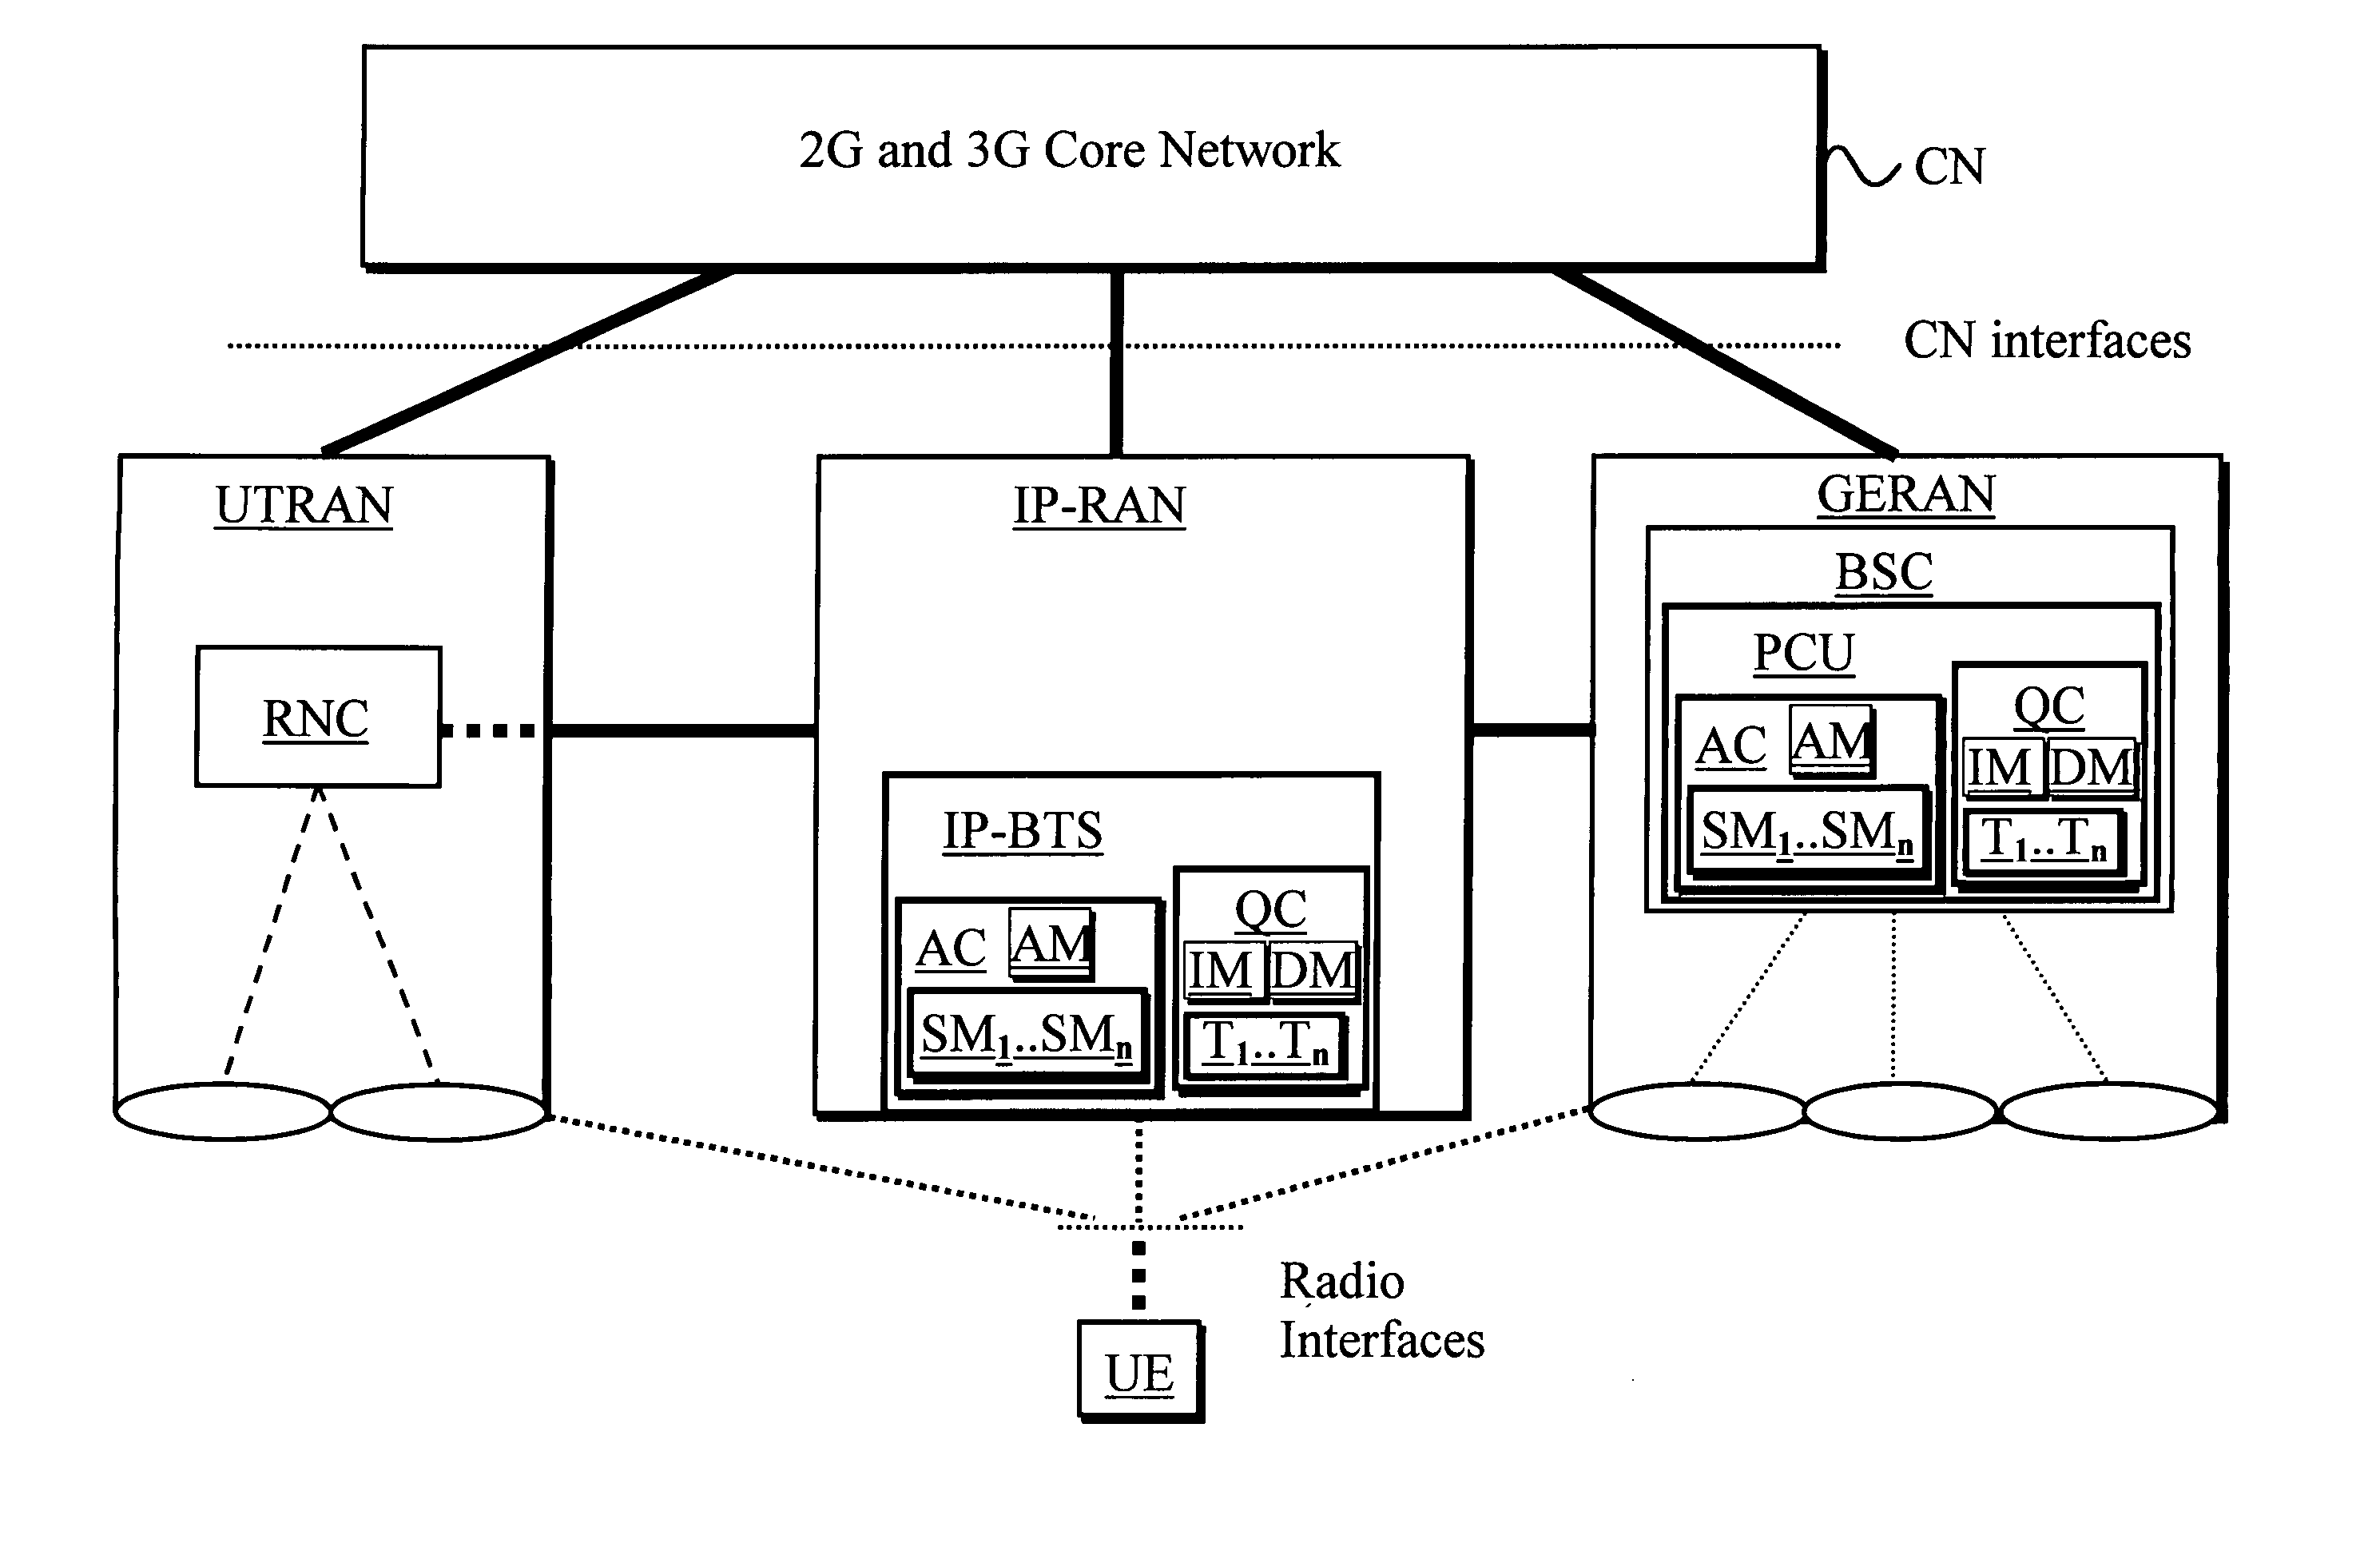 Admission control for data connections